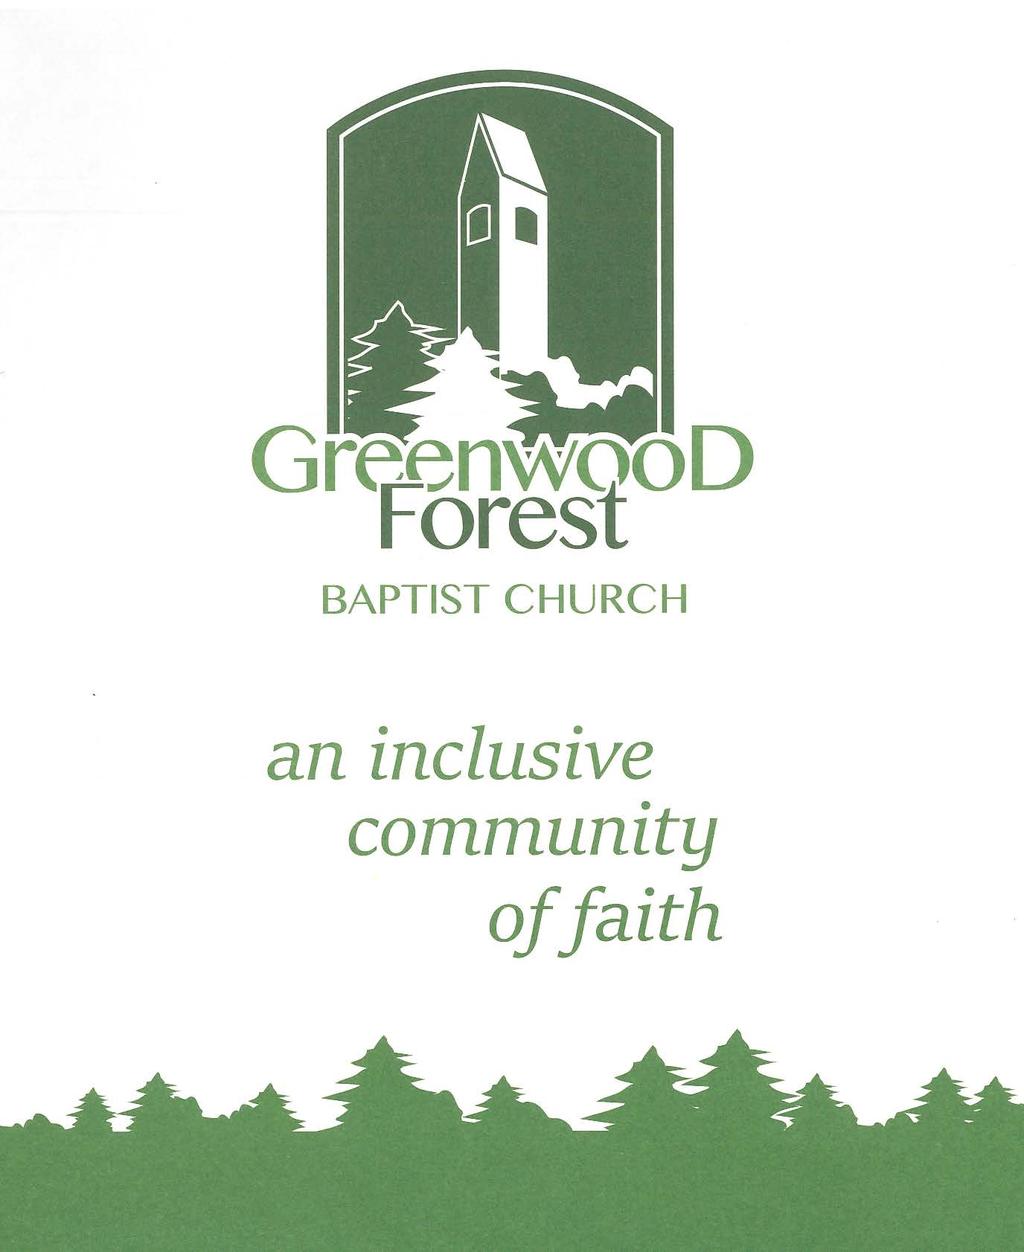 GREENWOOD FOREST BAPTIST CHURCH The Worship of God The Fourth Sunday of Lent March 31, 2019 Chiming of the Hour Processional Hymn 171 Welcome to Worship What Wondrous Love Is This Rev.